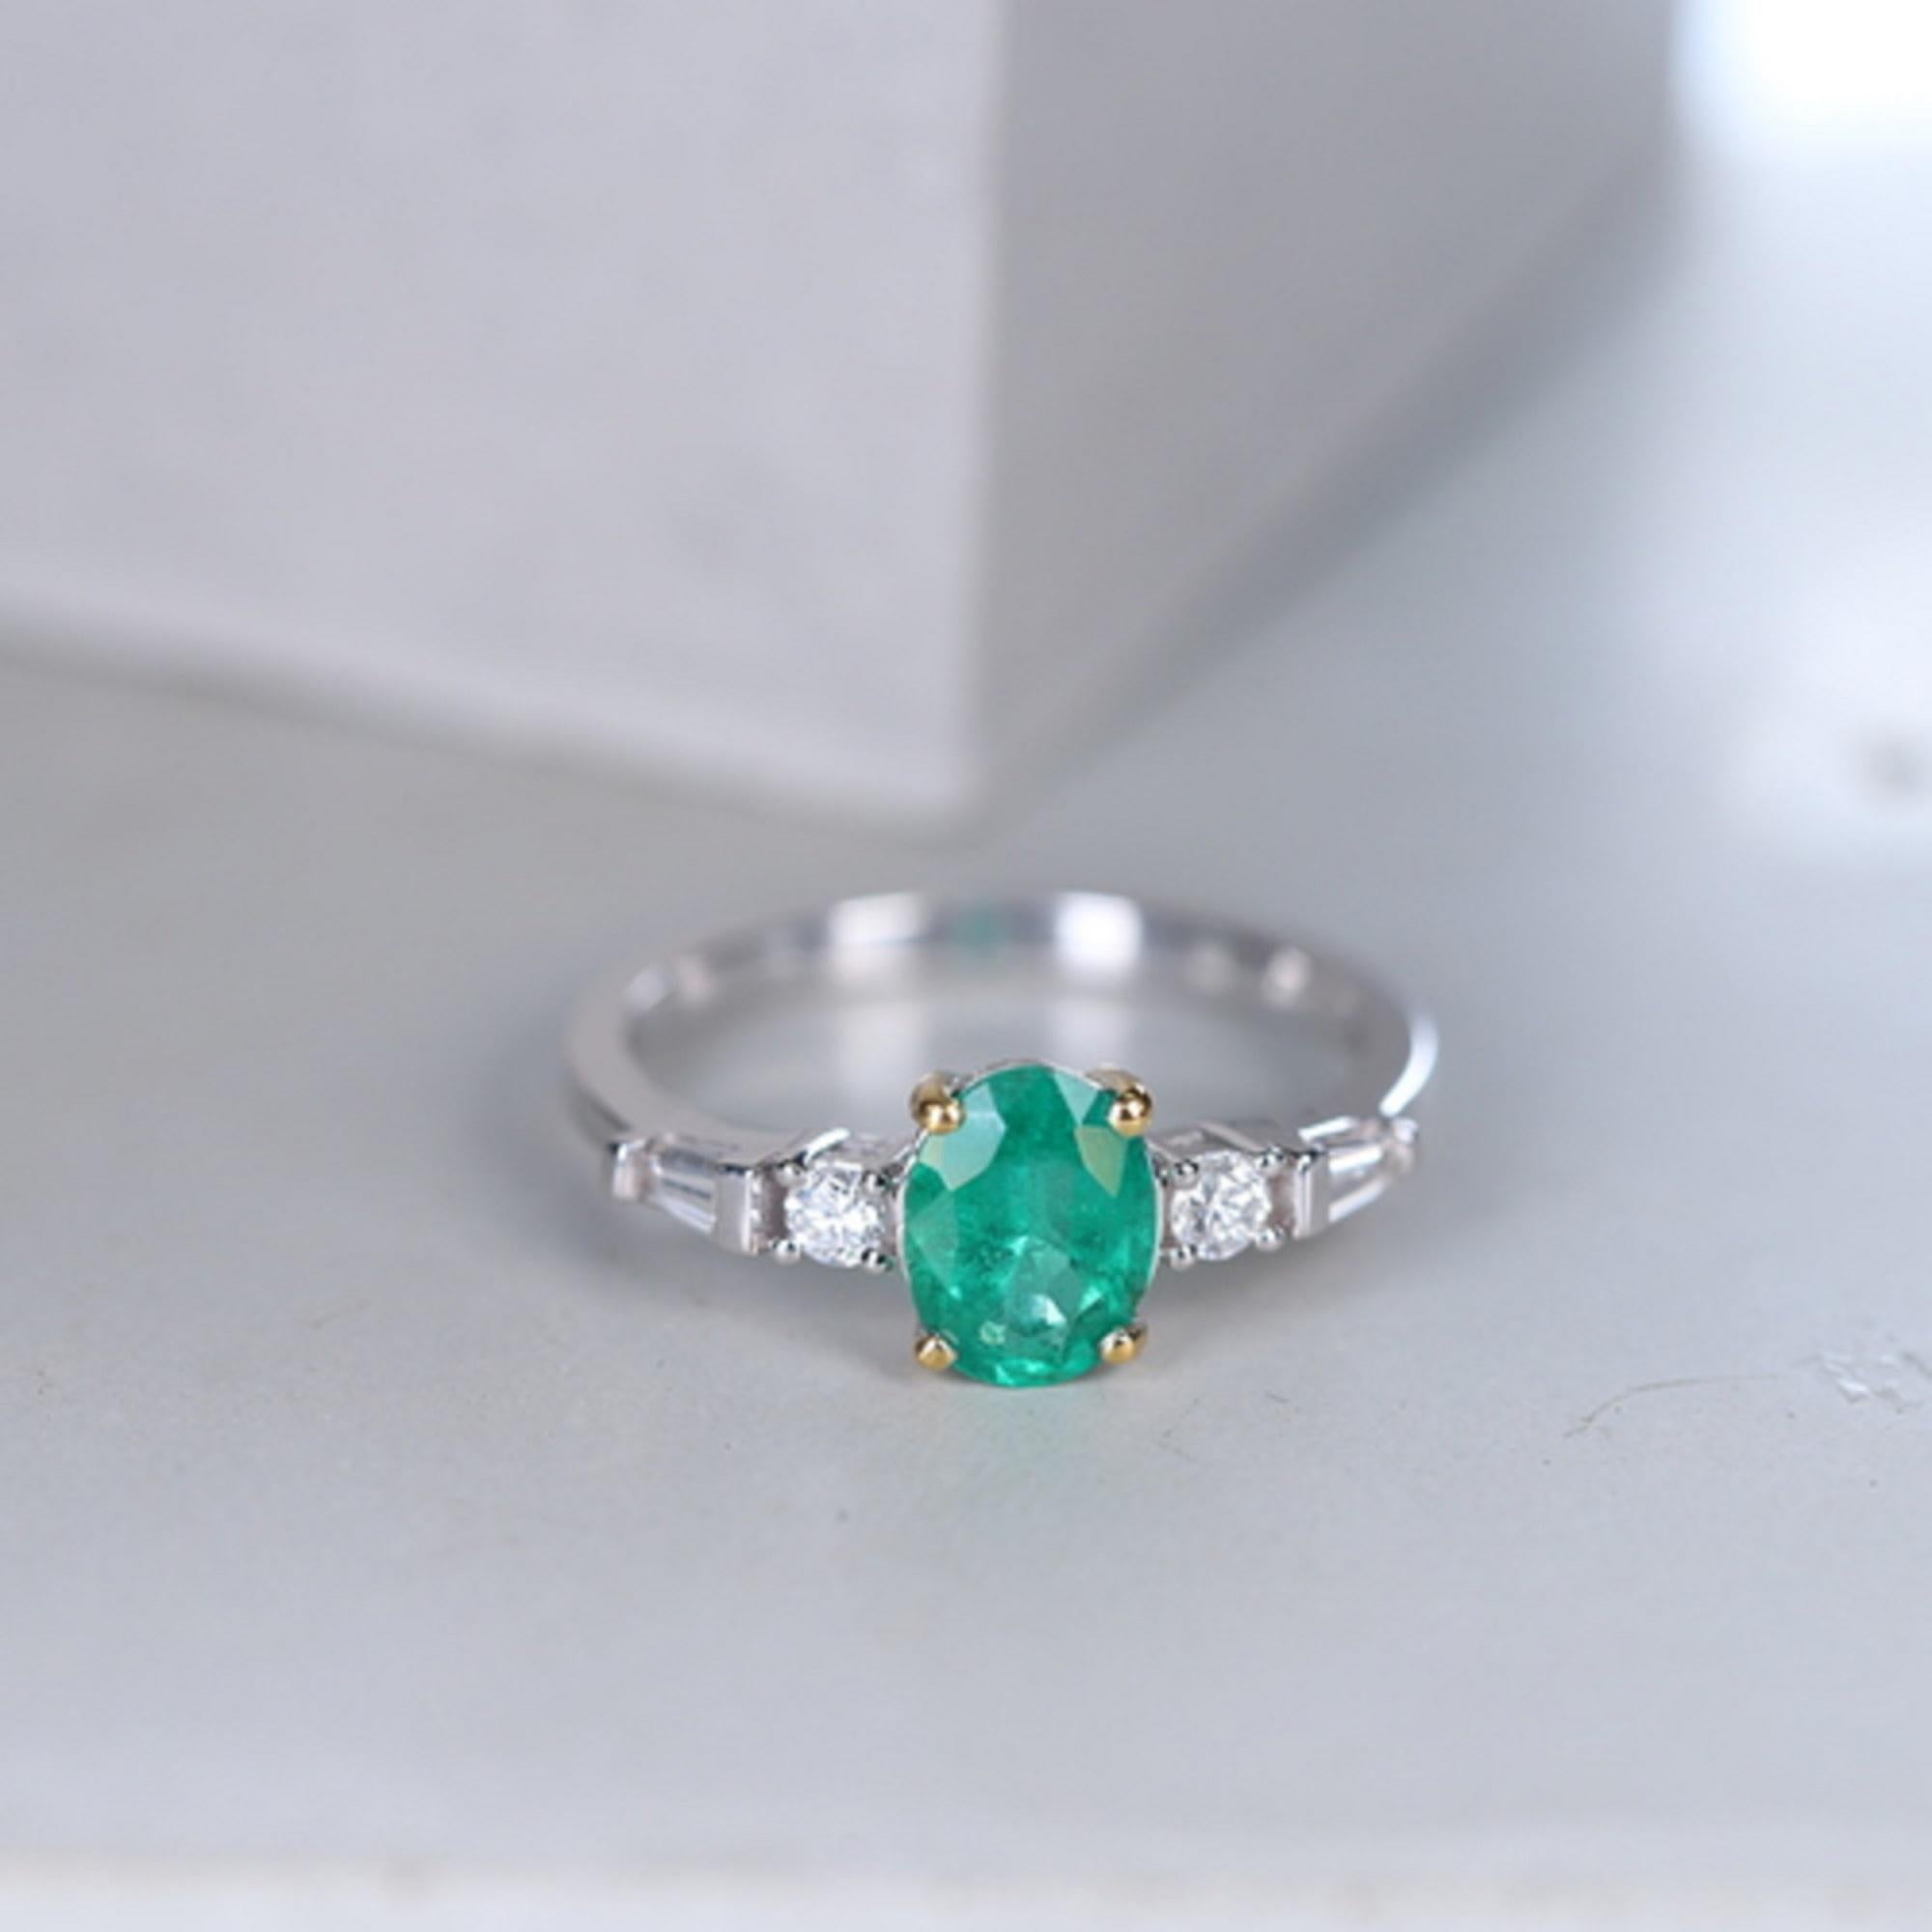 Stunning, timeless and classy eternity Unique Ring. Decorate yourself in luxury with this Gin & Grace Ring. The 18k White Gold jewelry boasts Oval cut Prong Setting Natural Zambian Emerald (1 pcs) 0.99 Carat, along with Natural Round cut white